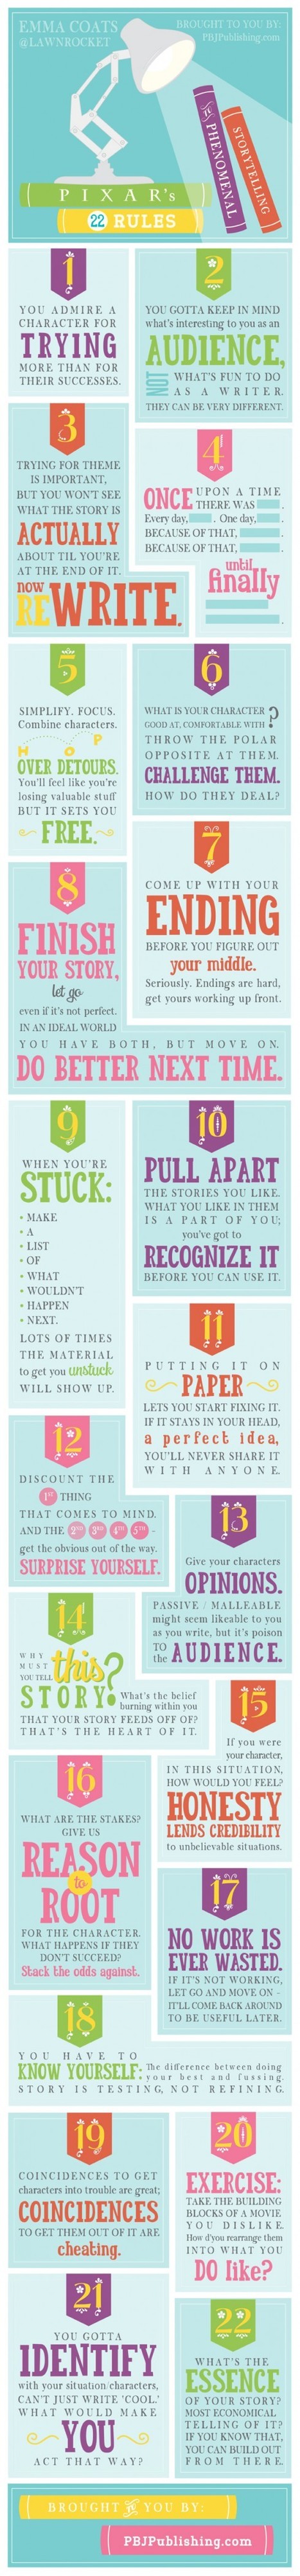 Pixar’s 22 Rules to Phenomenal Storytelling [INFOGRAPHIC] | Digital Delights - Digital Tribes | Scoop.it